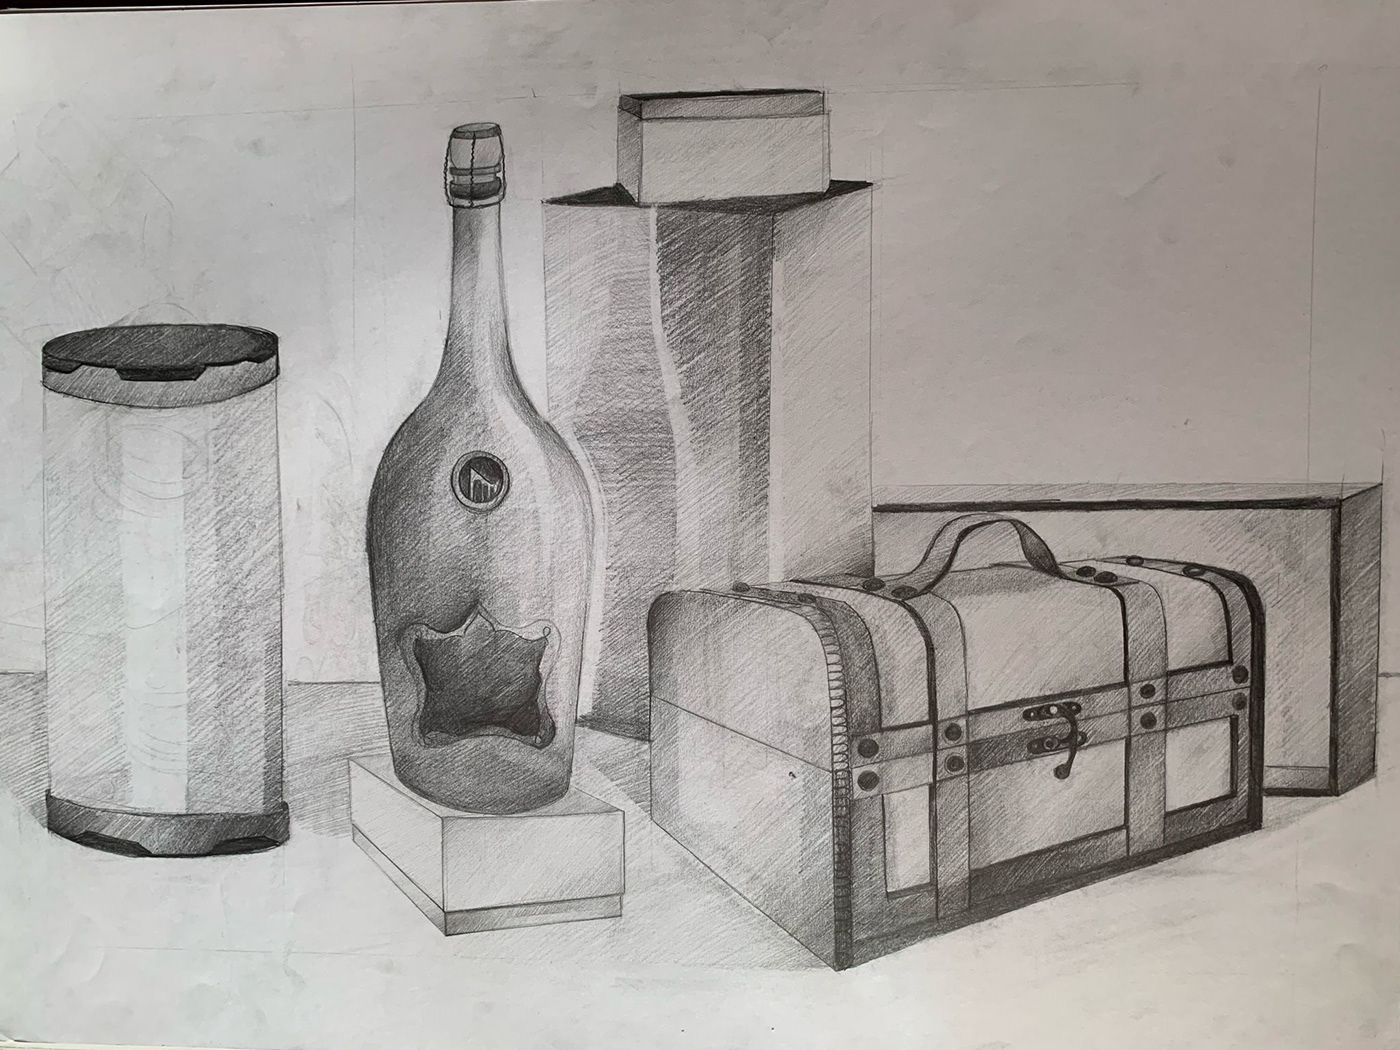 A few objects represented in a static nature draw.